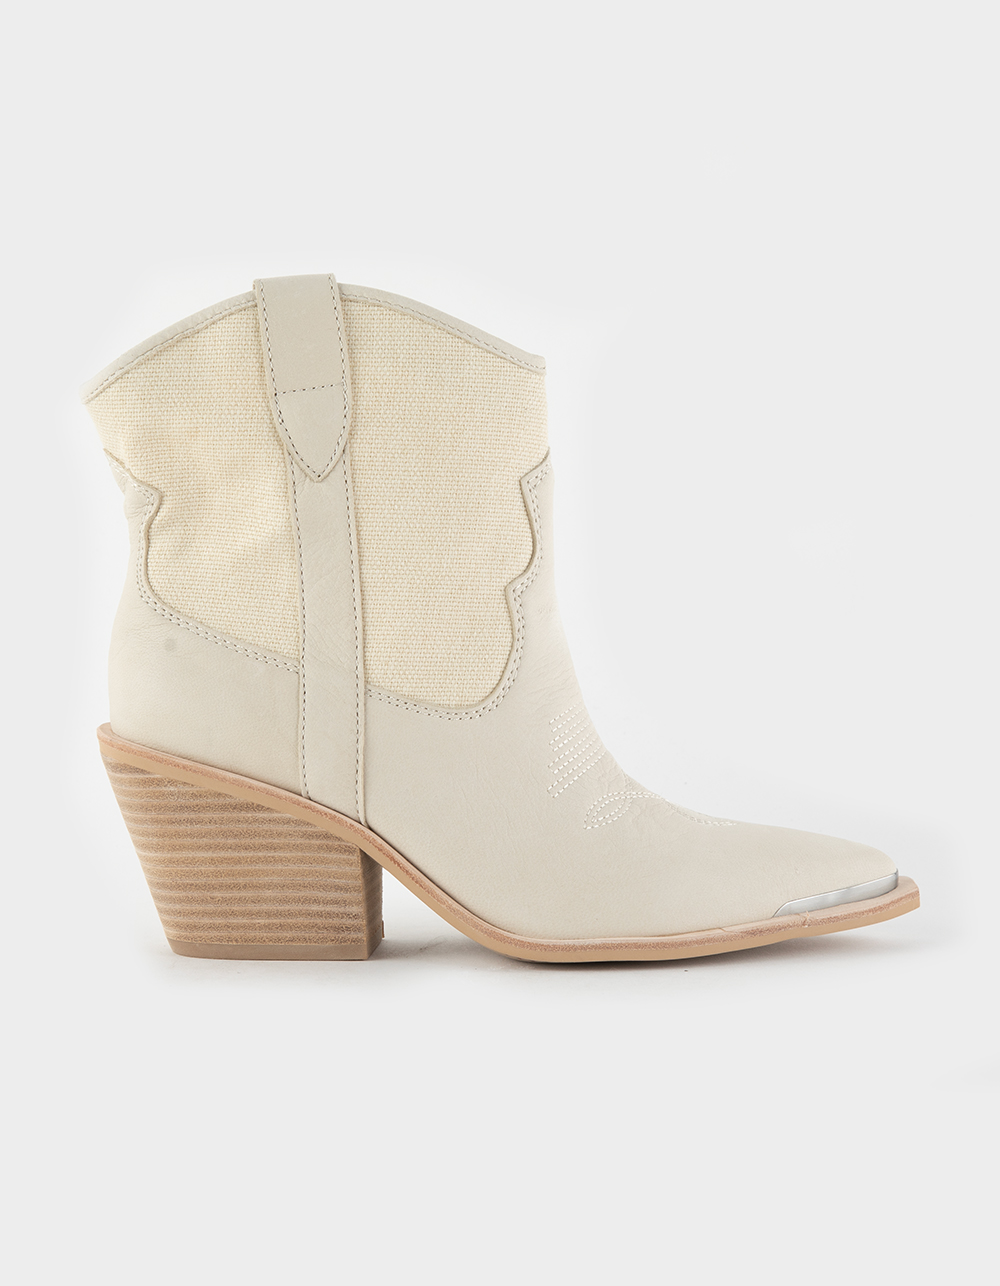 DOLCE VITA Nashe Womens Western Booties - IVORY | Tillys